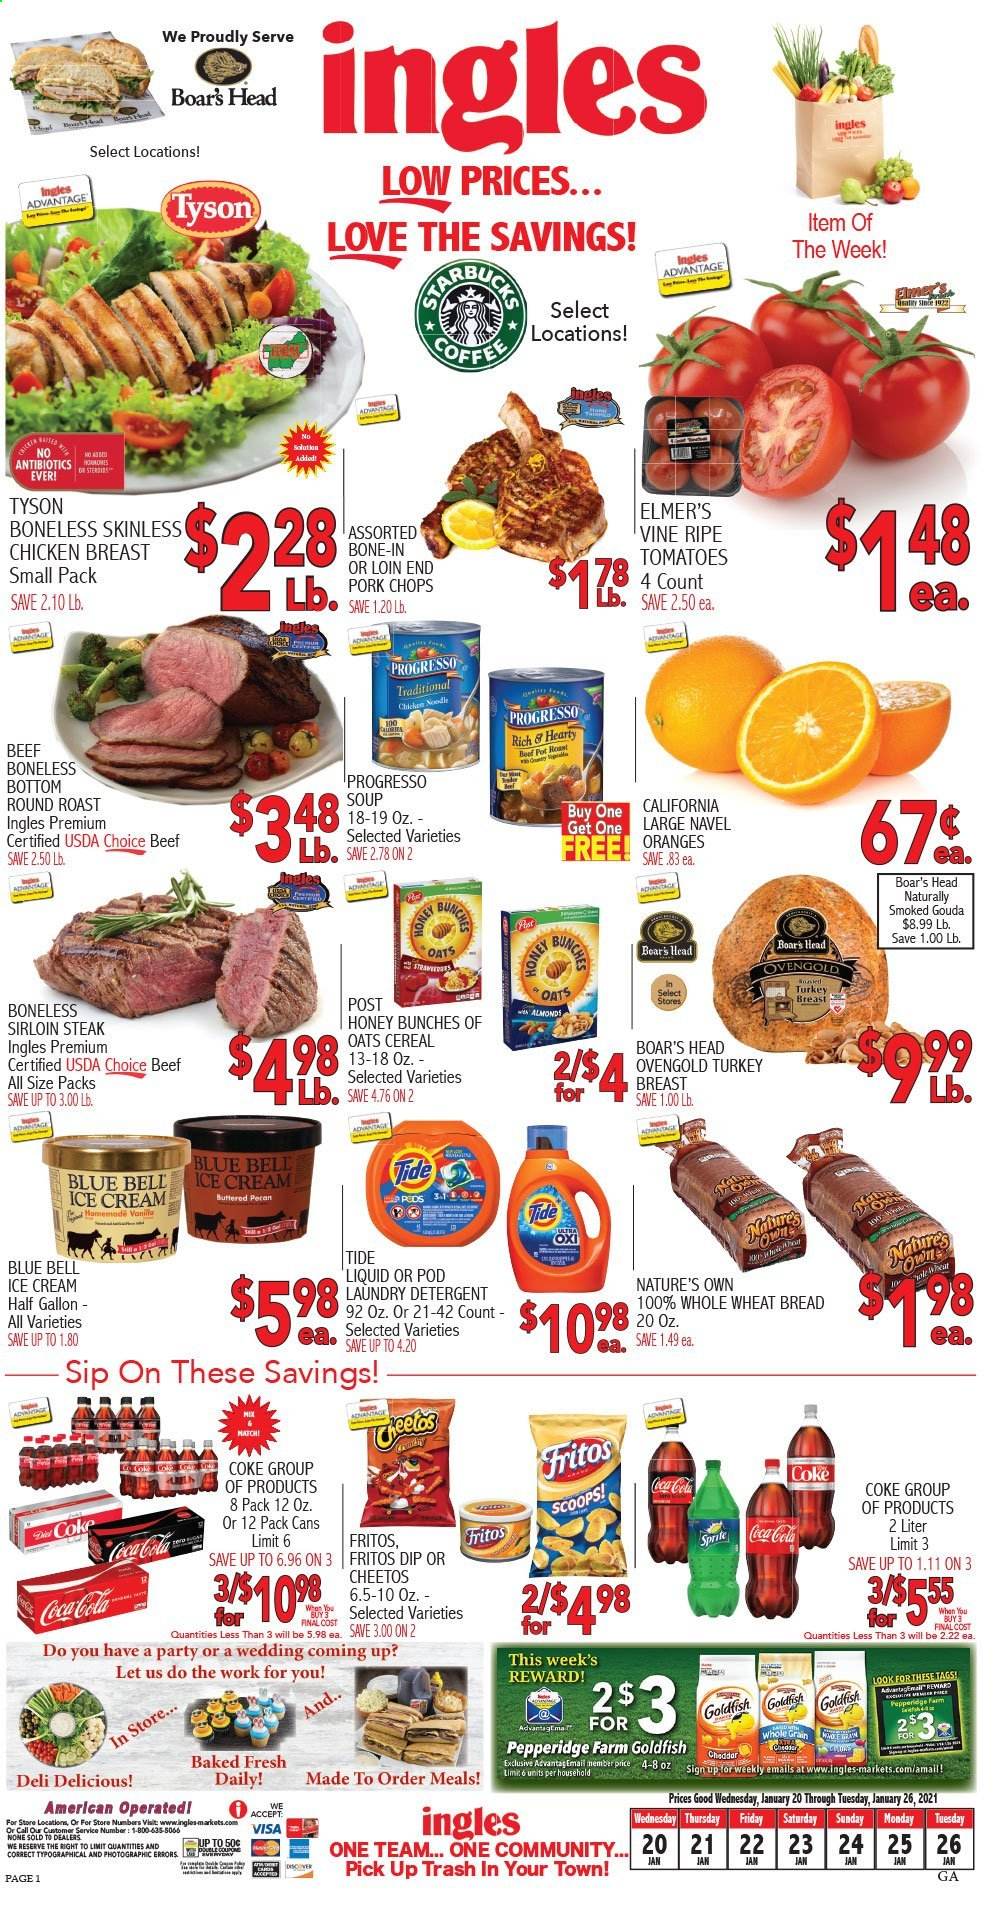 thumbnail - Ingles Flyer - 01/20/2021 - 01/26/2021 - Sales products - wheat bread, oranges, Progresso, gouda, dip, ice cream, Blue Bell, Cheetos, Goldfish, oats, cereals, Fritos, Coca-Cola, turkey breast, chicken breasts, beef meat, beef sirloin, steak, round roast, sirloin steak, pork chops, pork meat, detergent, Tide, laundry detergent, Nature's Own. Page 1.